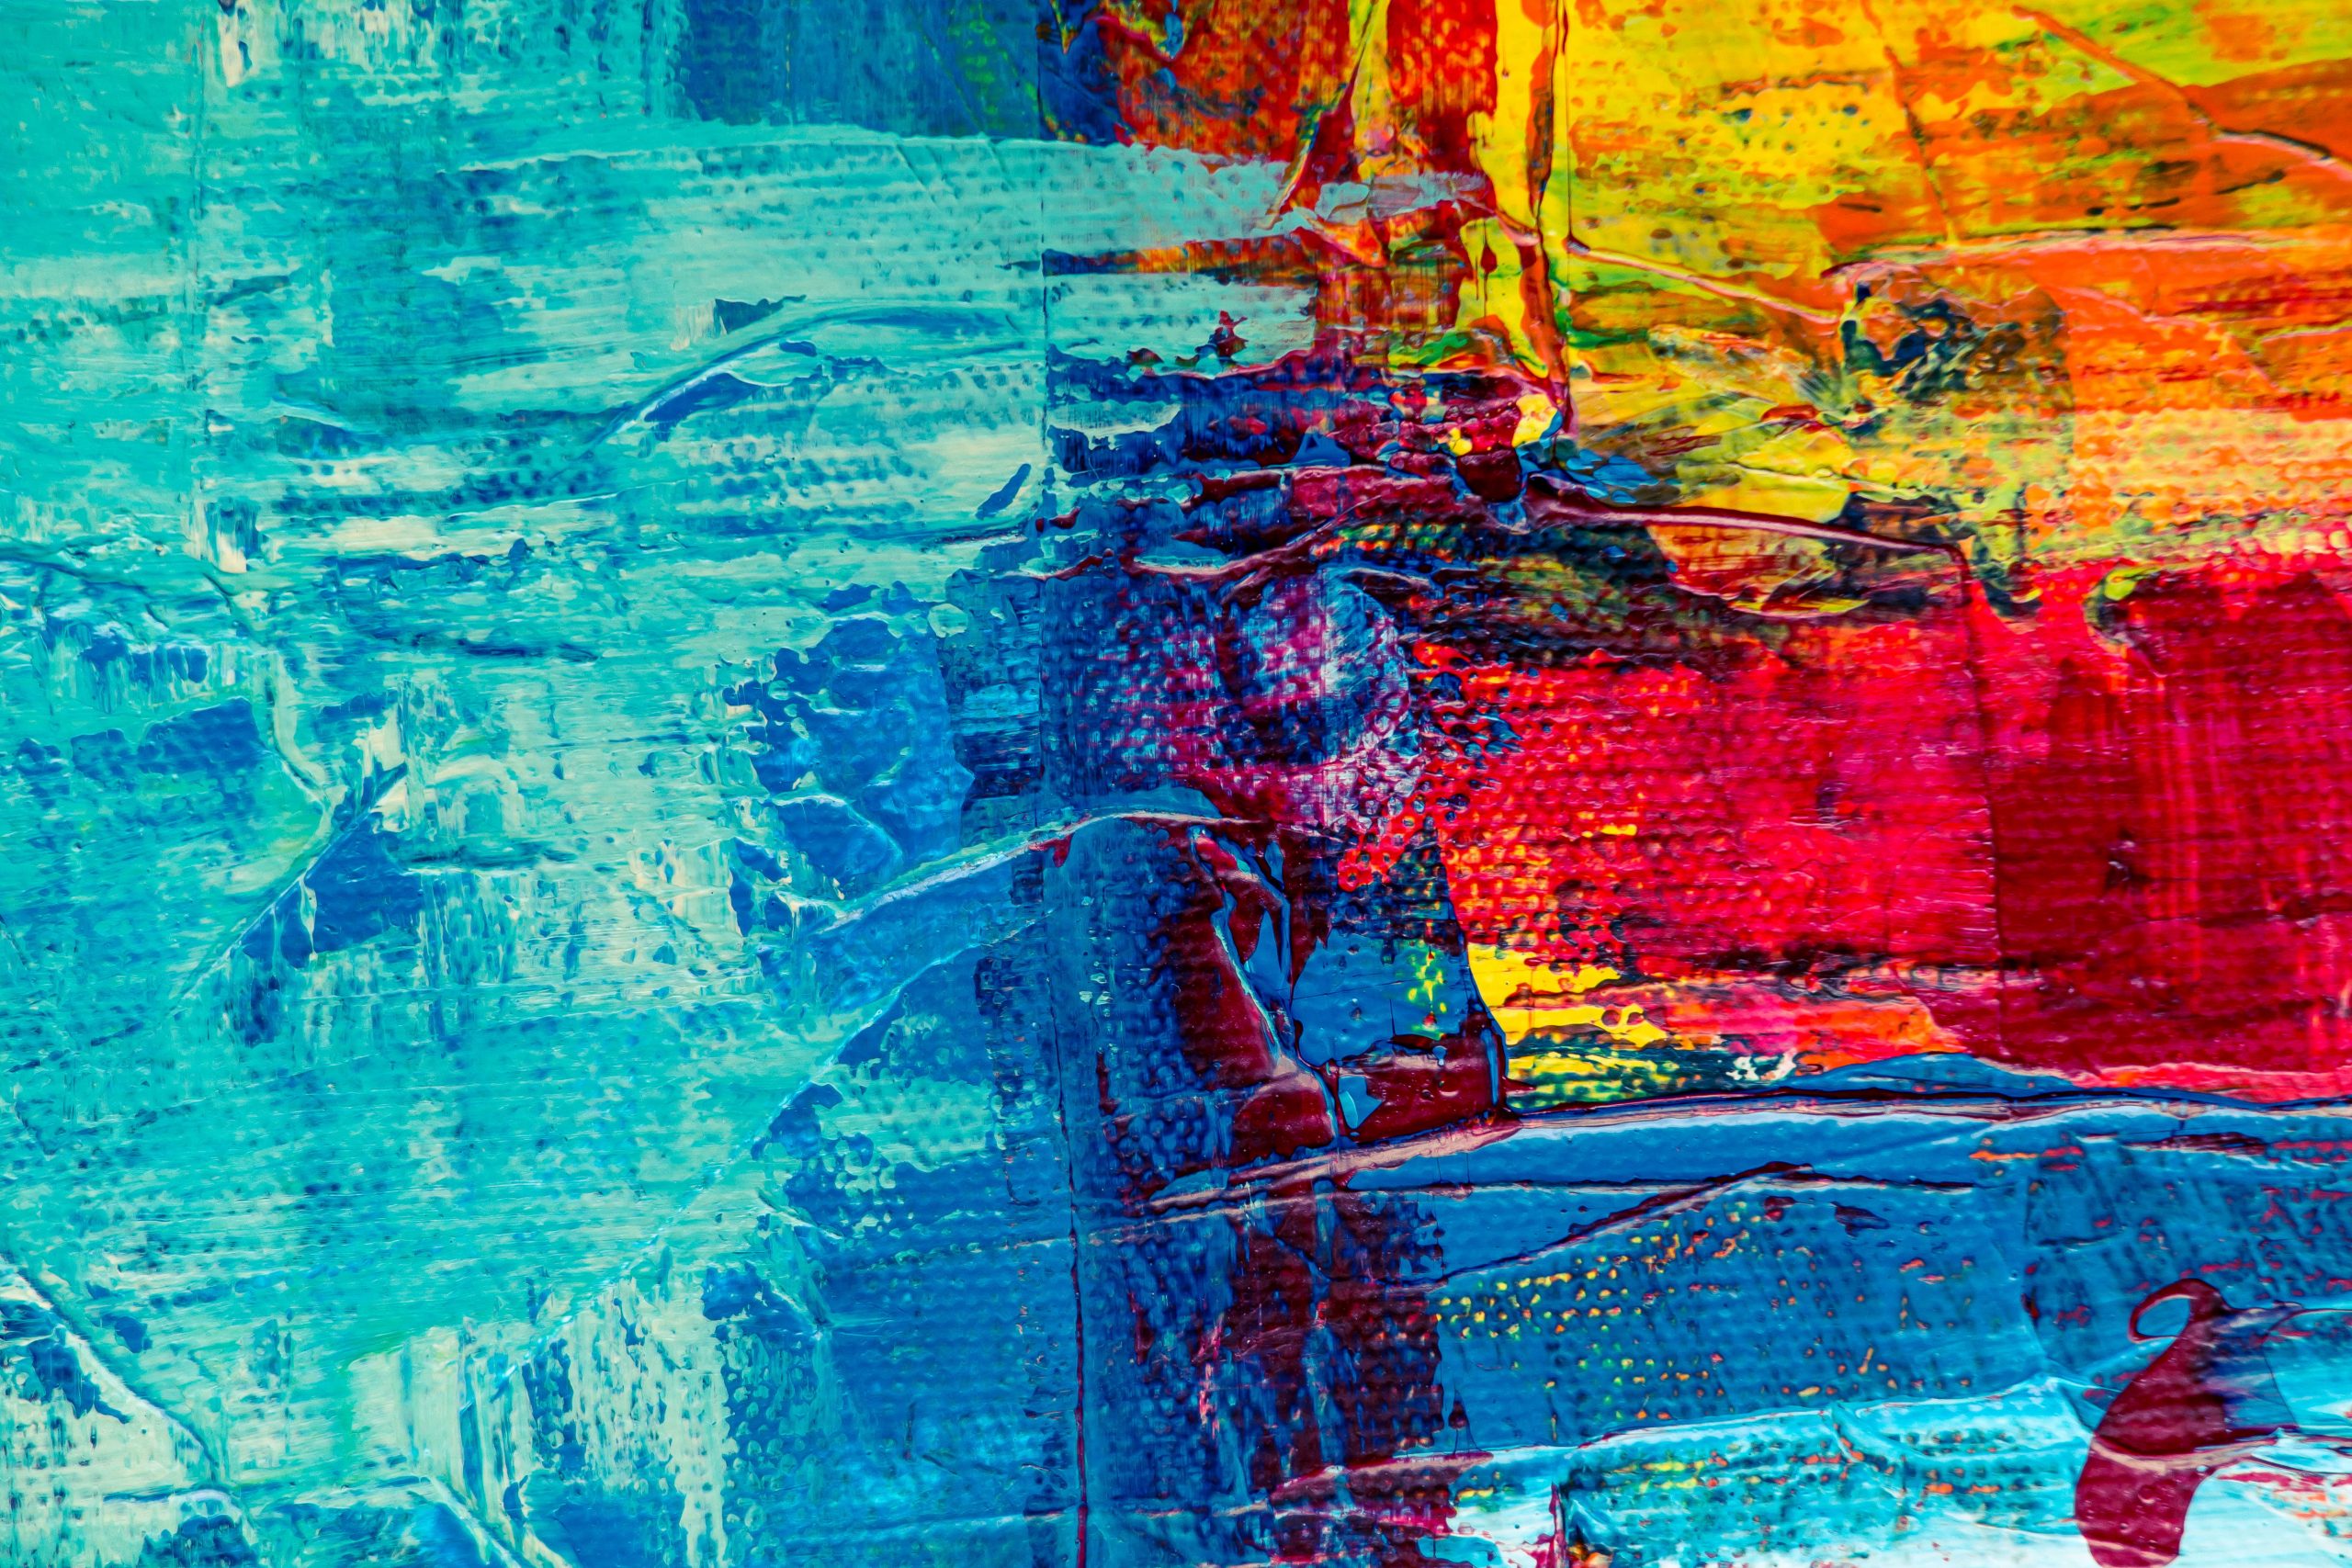 Abstract Painting wallpaper, art, artistic, canvas, close-up, colorful